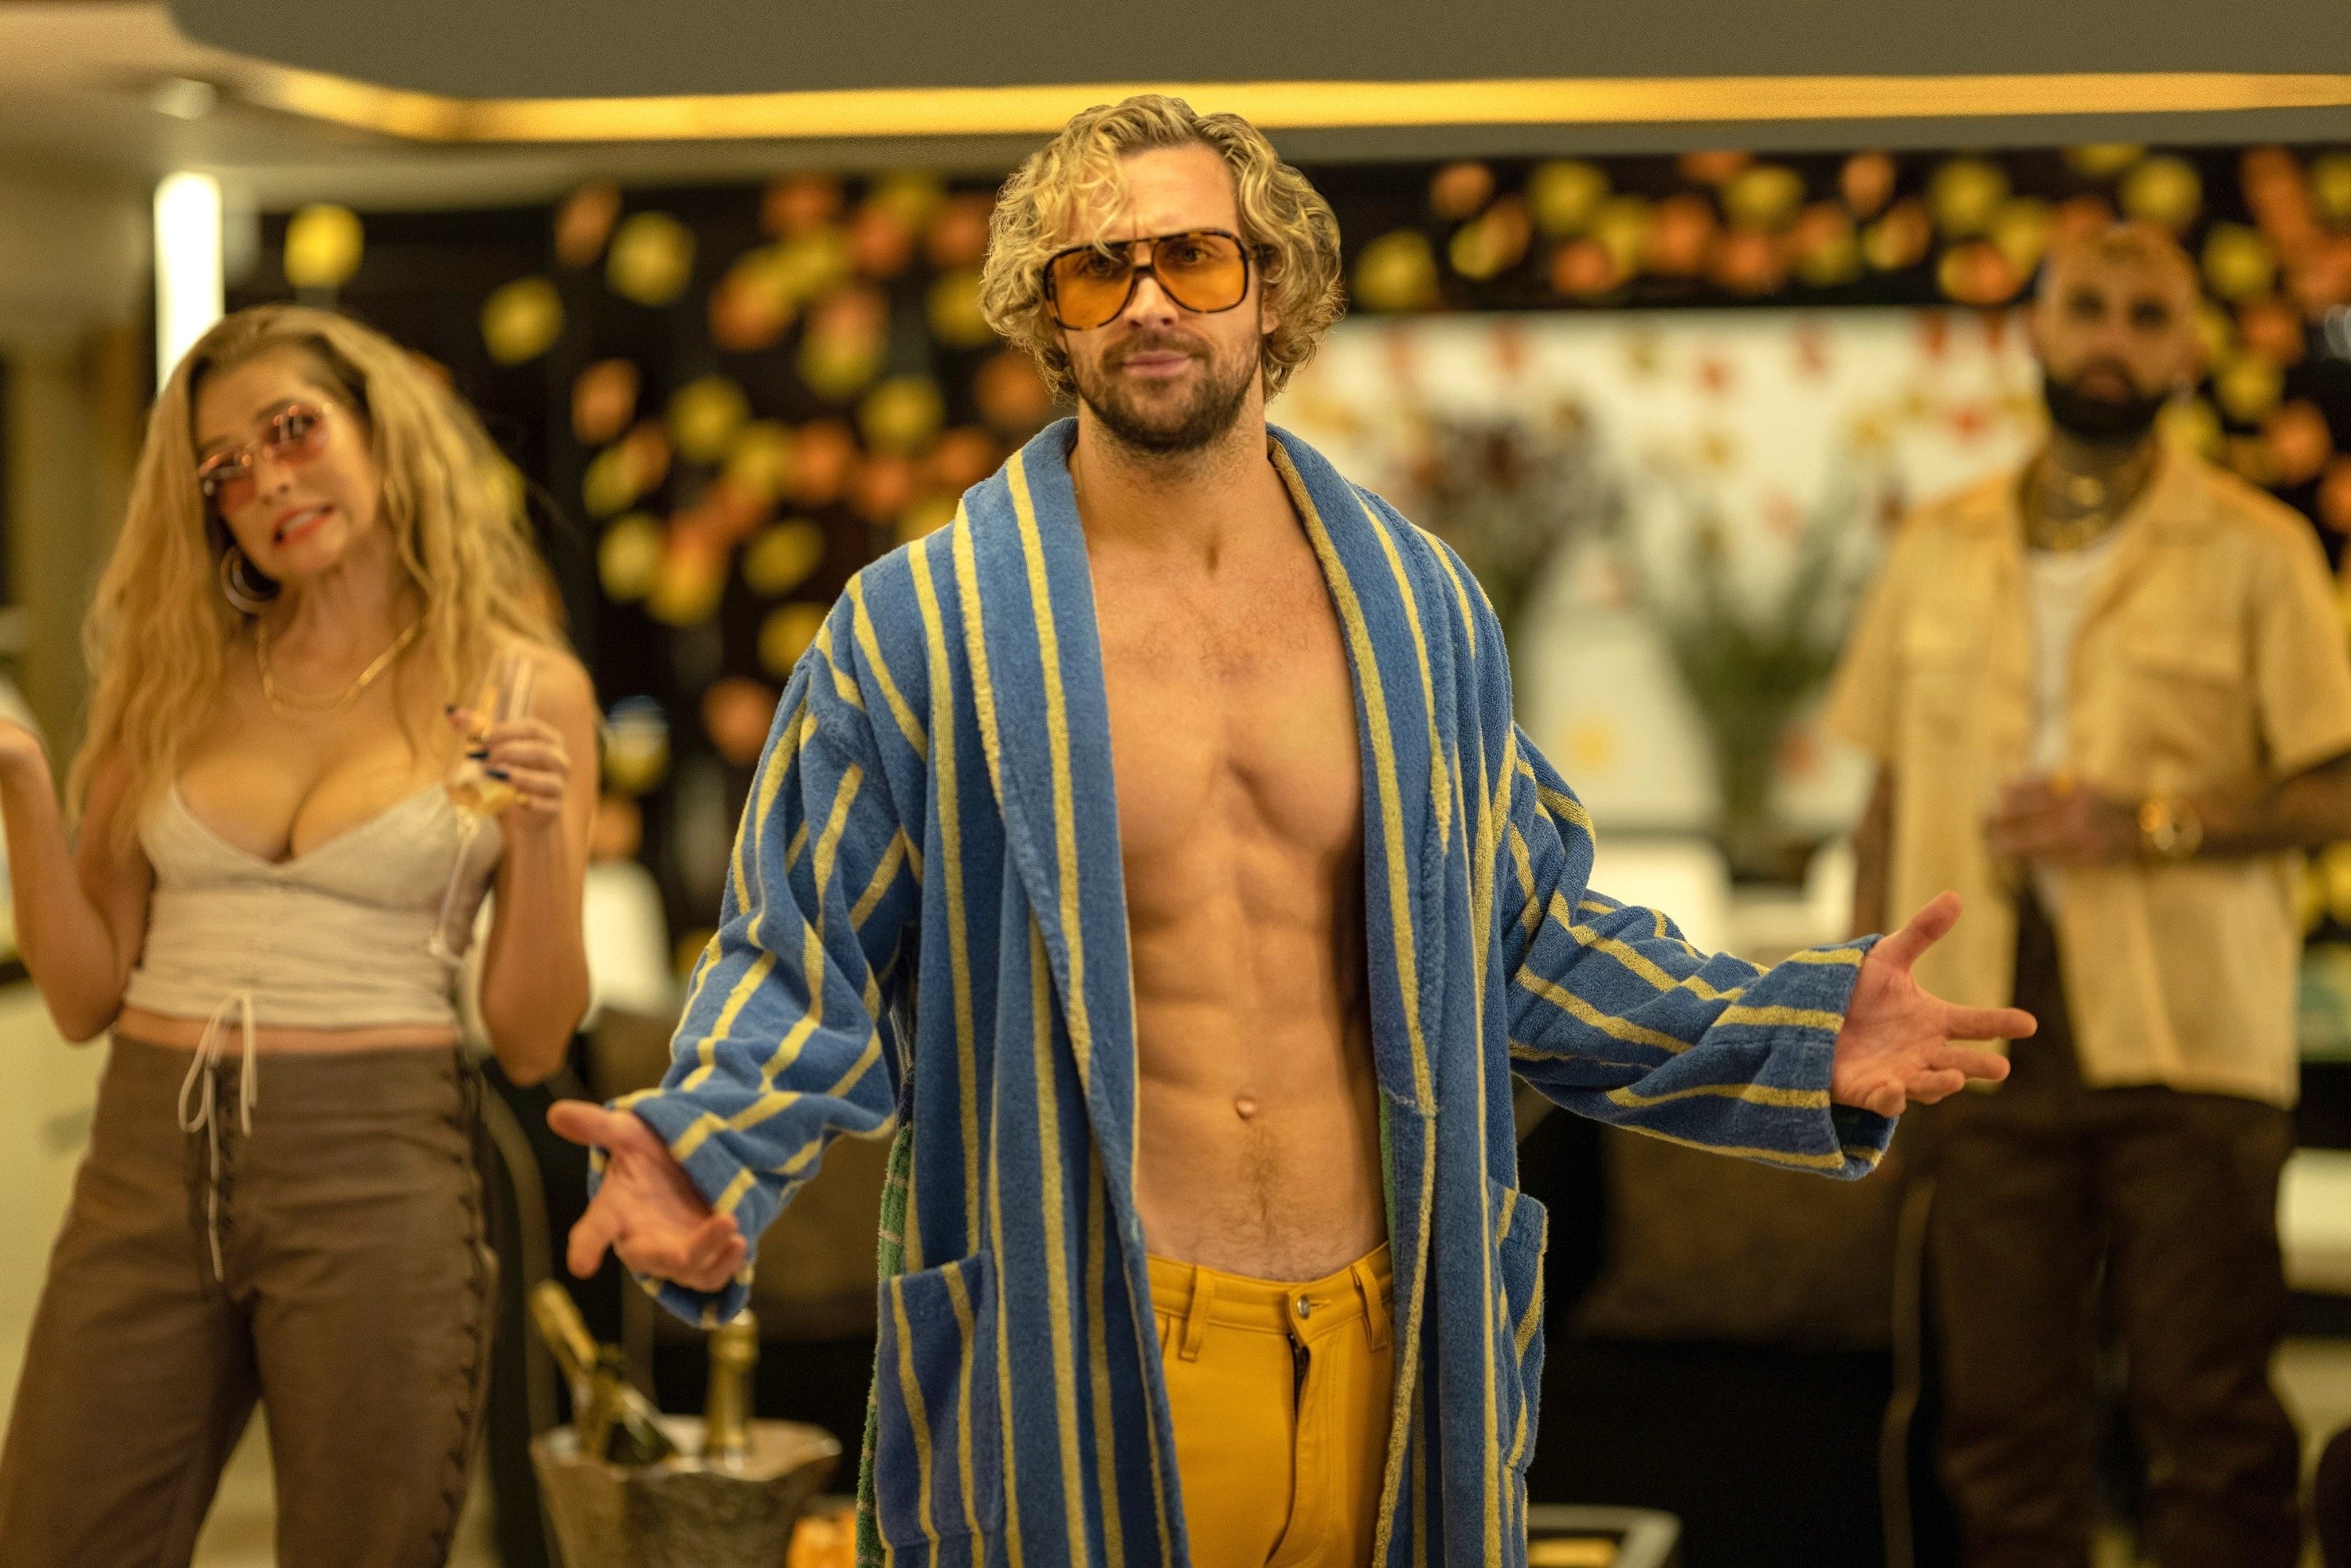 Aaron Taylor-Johnson in a party scene wearing a striped robe with two people standing in the background